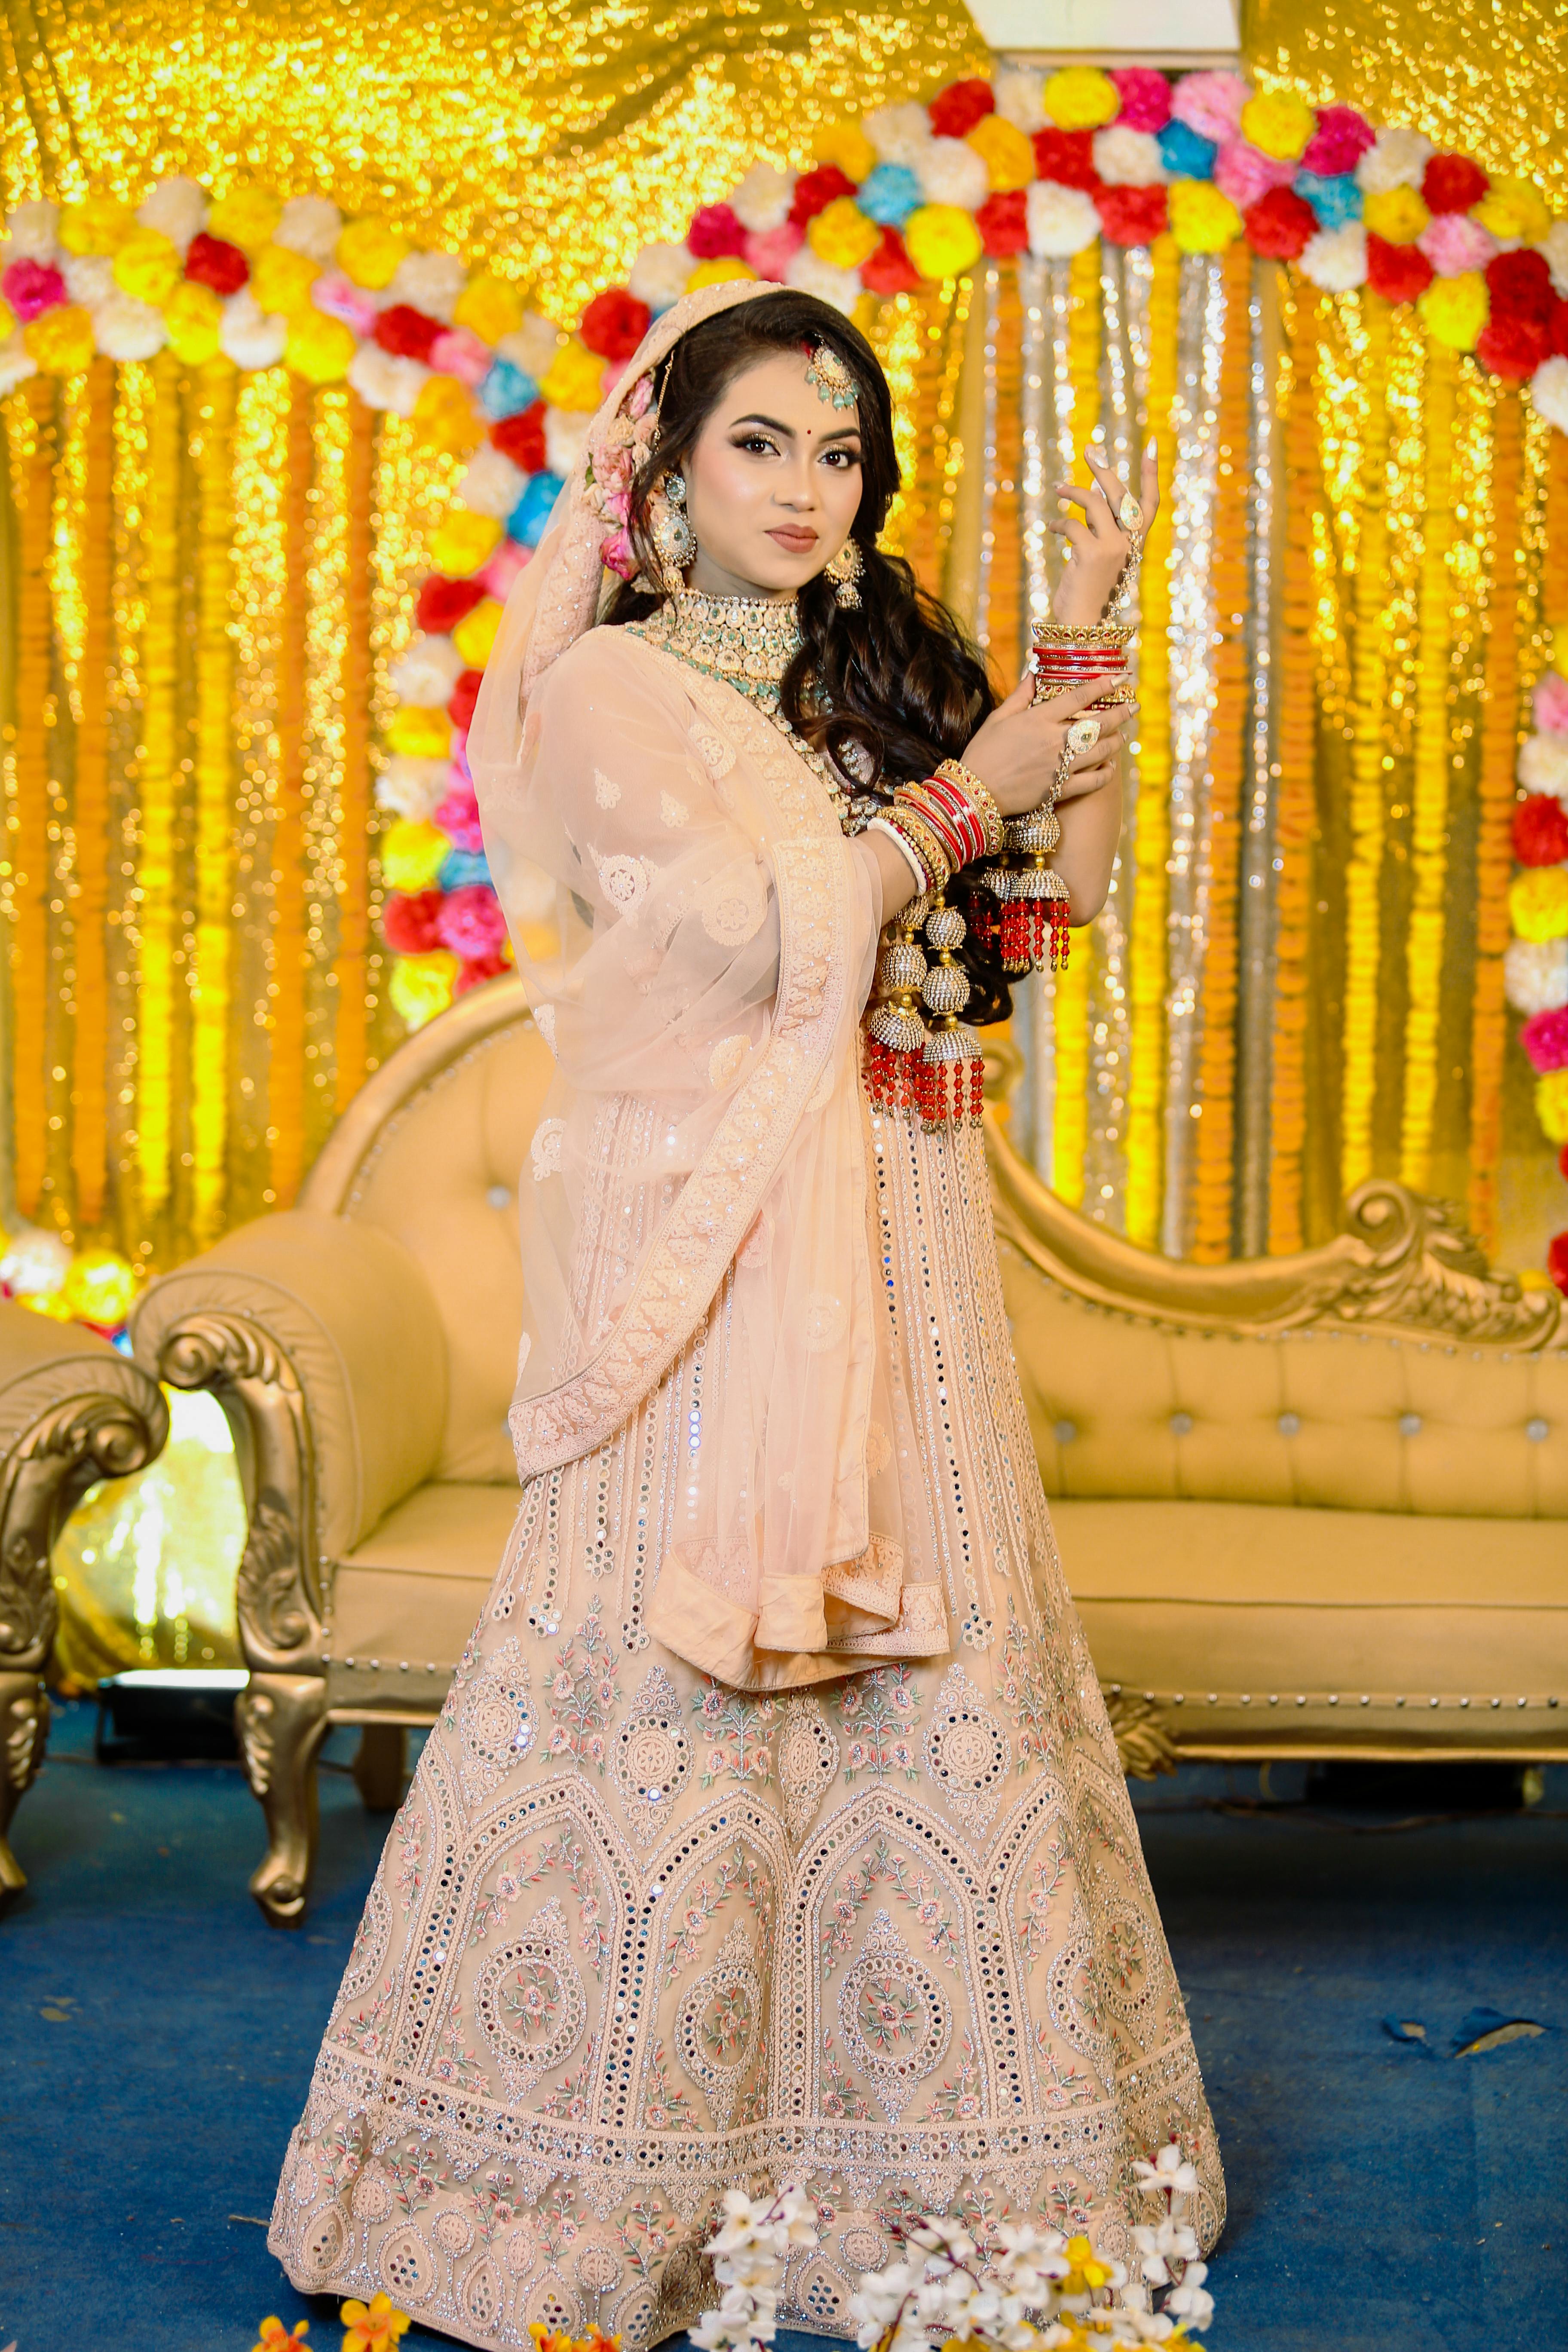 WATCH: TikToker bride wears see-through dress and traditional Indian lehenga